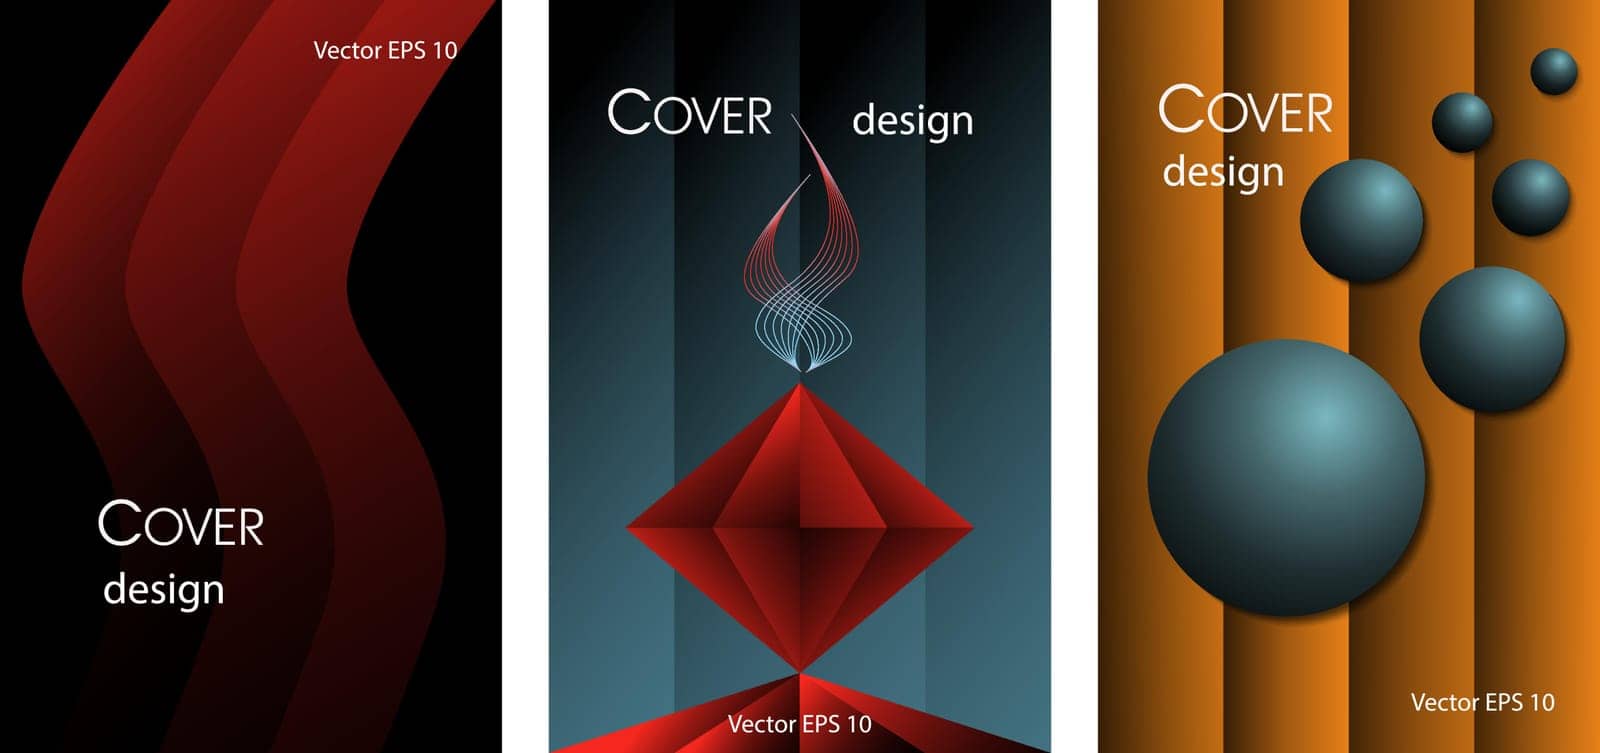 Set of abstract shapes. Posters in red, black and blue colors.
Red wave, abstract altar, balls on a striped background. Suitable for banners, posters, web, social networks, email, print, etc. Vector EPS 10